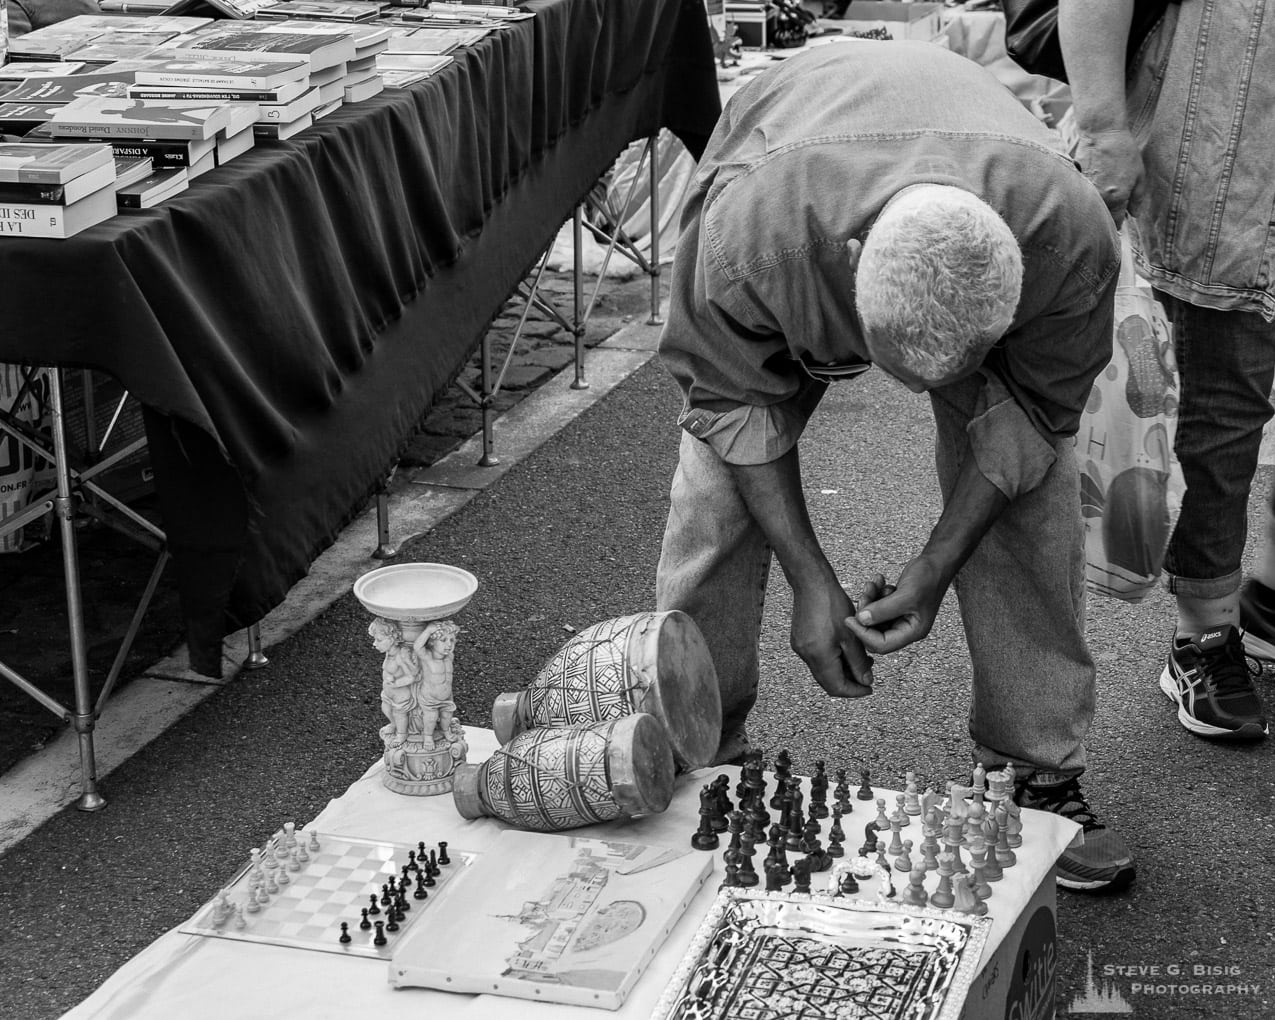 Photo 20/32 of a series of black and white photographs from the 2018 Grande Braderie D'Ixelles sidewalk sale and street festival in Brussels, Belgium.